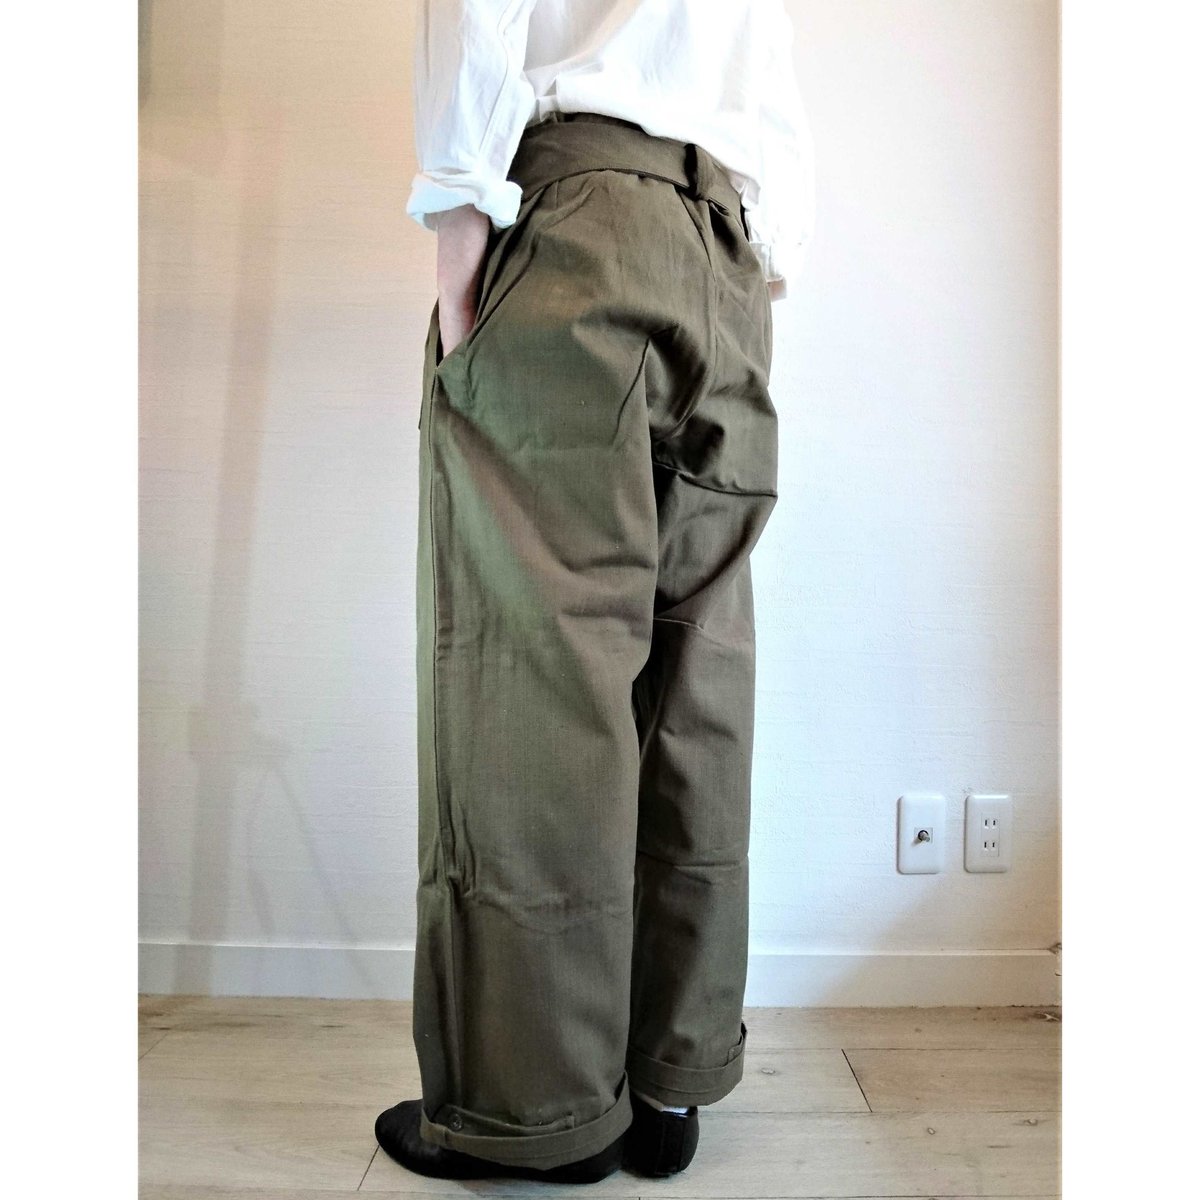 French Army M Motorcycle Pants DeadStockフラ